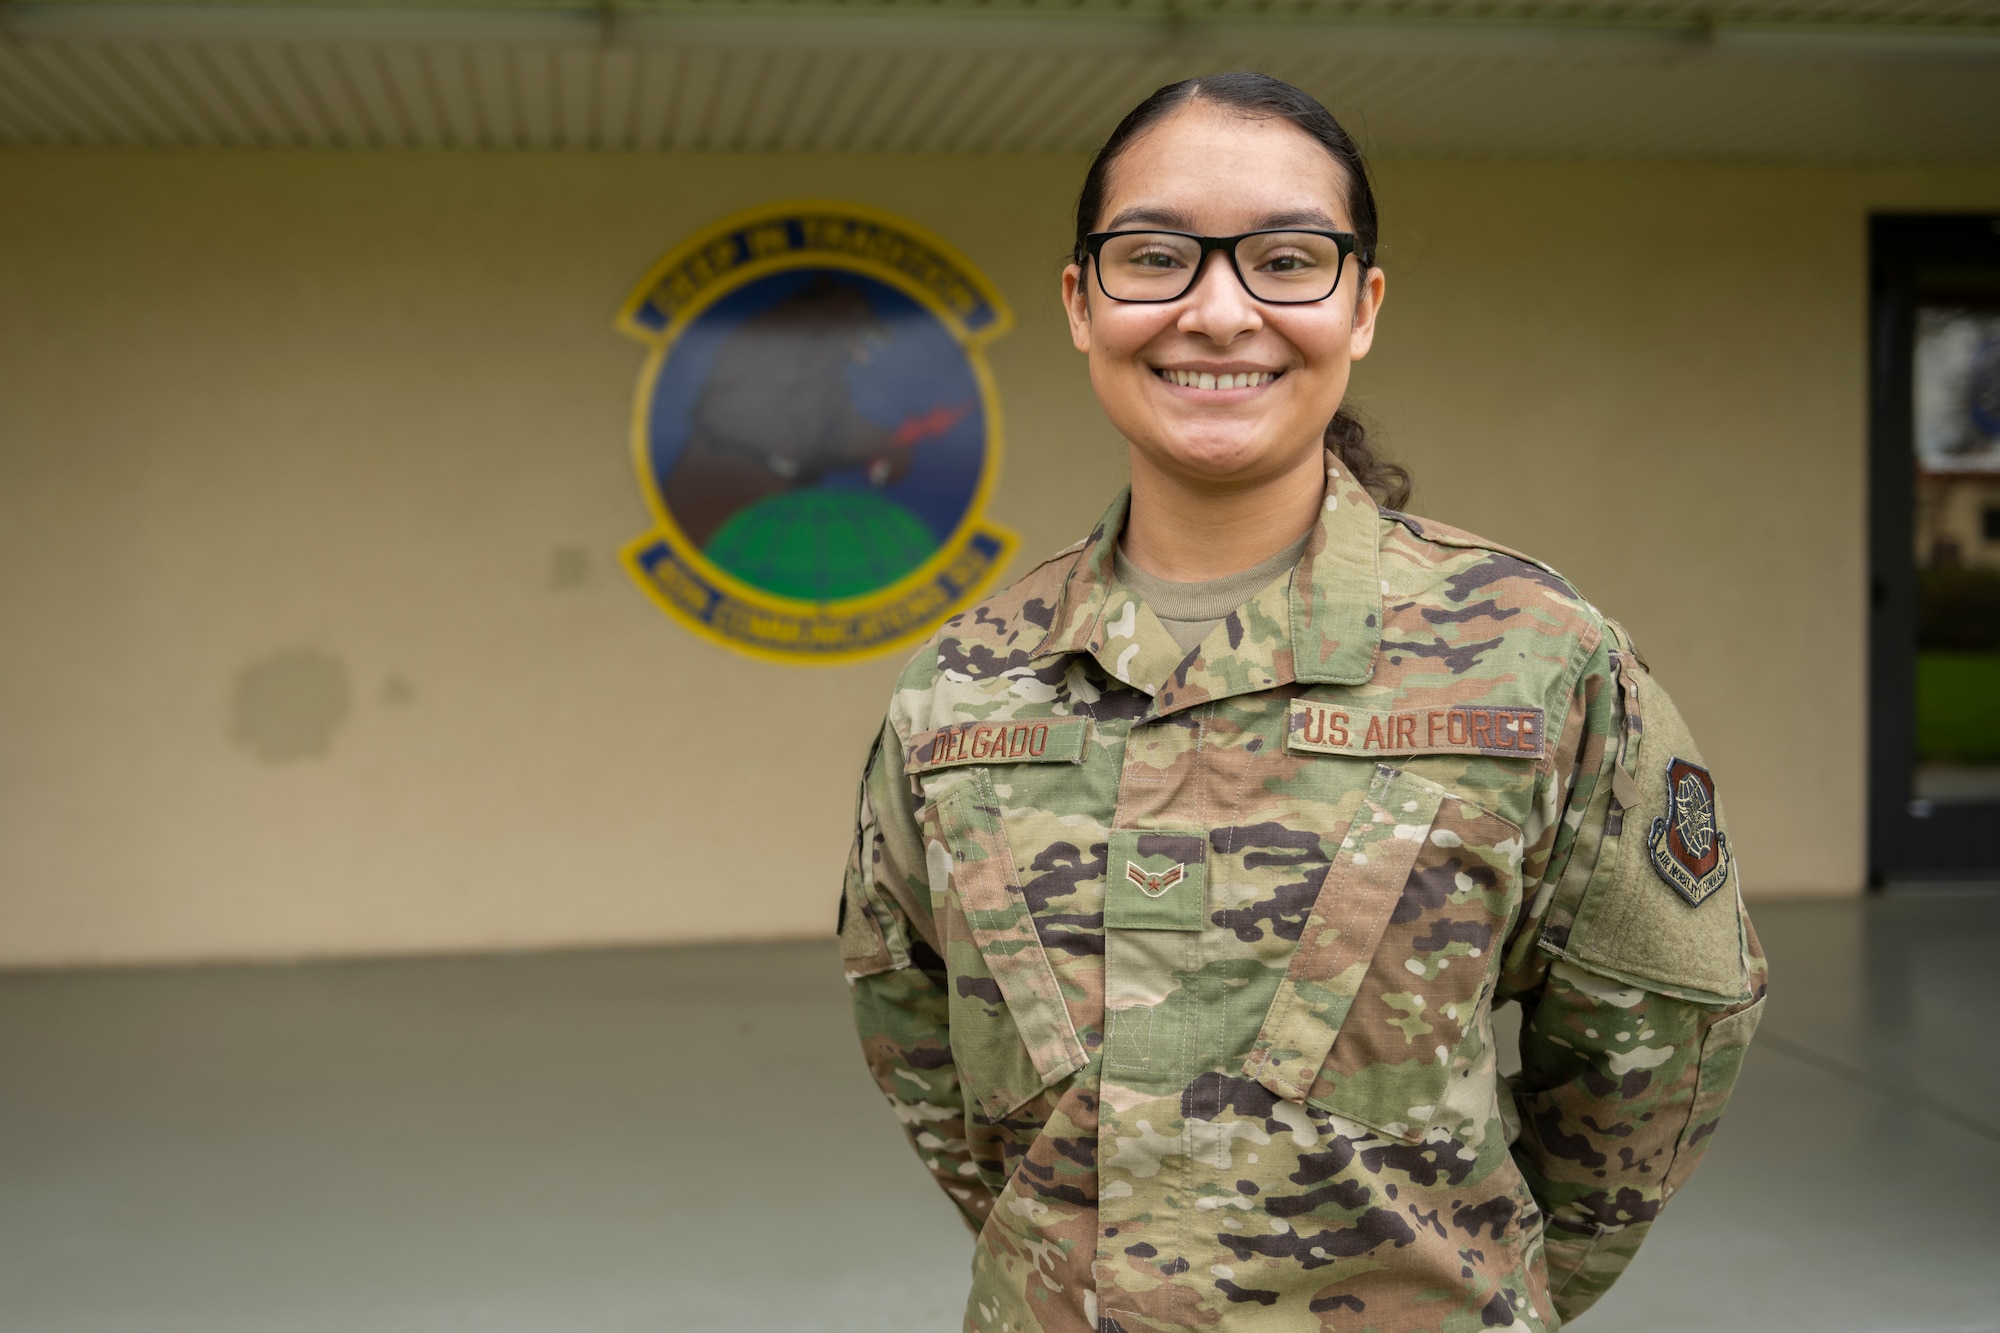 U.S. Airman 1st Class Thaila Delgado, 60th Communications Squadron knowledge management craftsman, poses for a photo Feb. 18, 2020, at Travis Air Force Base, California. Delgado drafted and coordinated with multiple base agencies to create a site that helps Airmen line up their budgeting, in efforts to help them move out of the base dorms more easily. (U.S. Air Force photo by Senior Airman Cameron Otte)